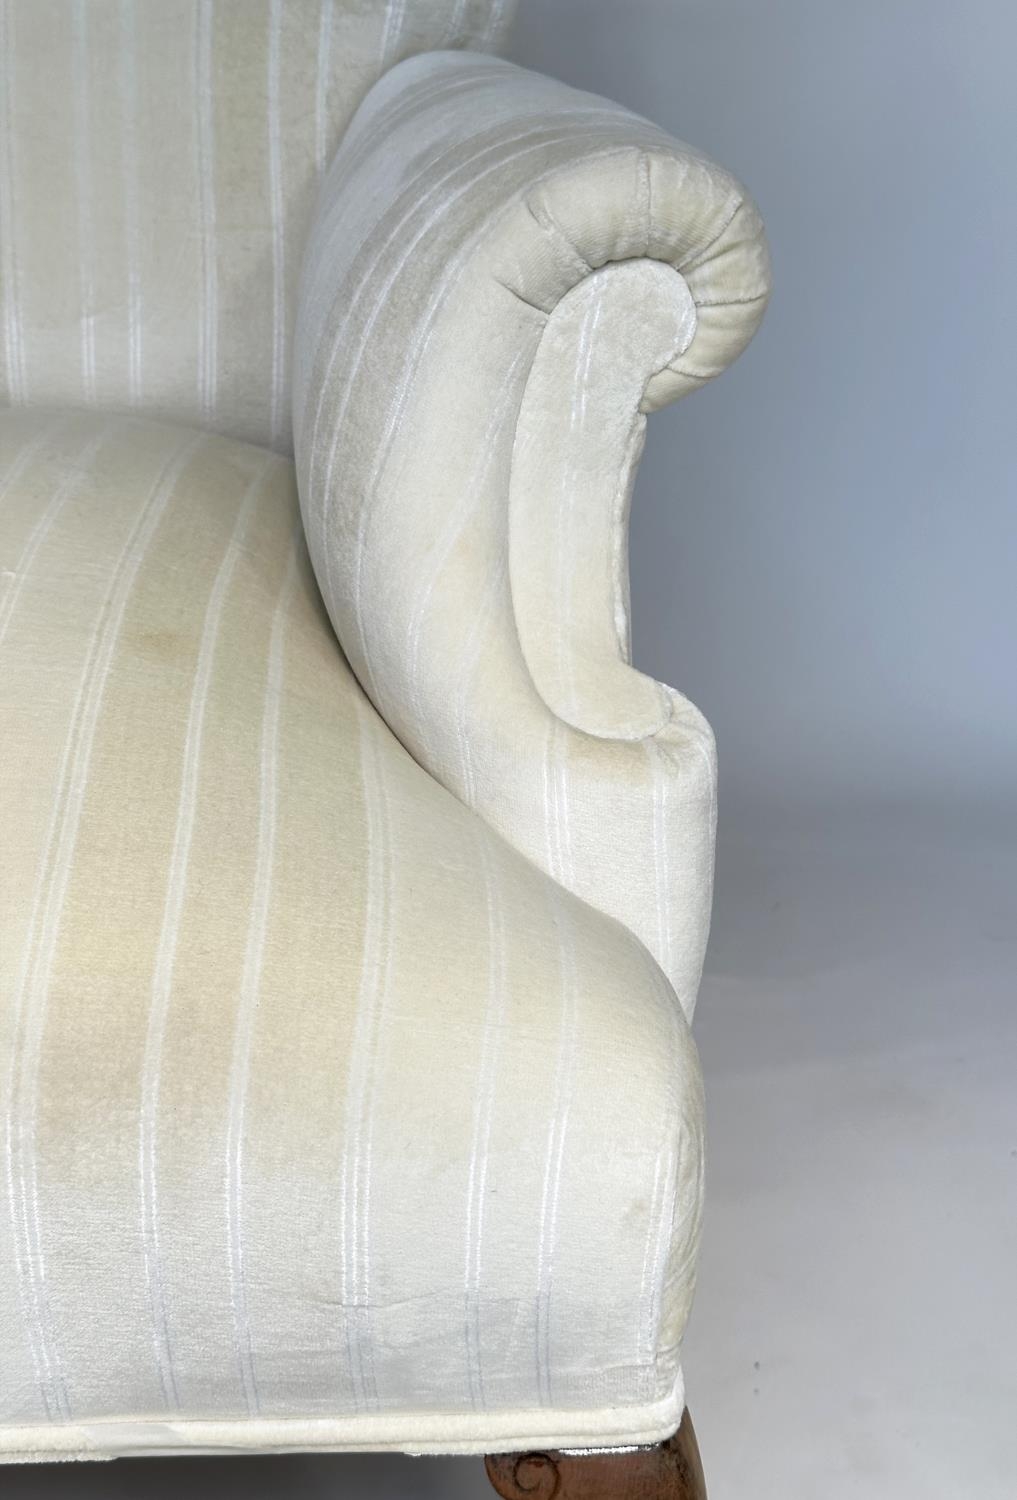 SCROLL ARMCHAIR, Edwardian style recently reupholstered, in neutral woven strip cotton with shaped - Image 5 of 5